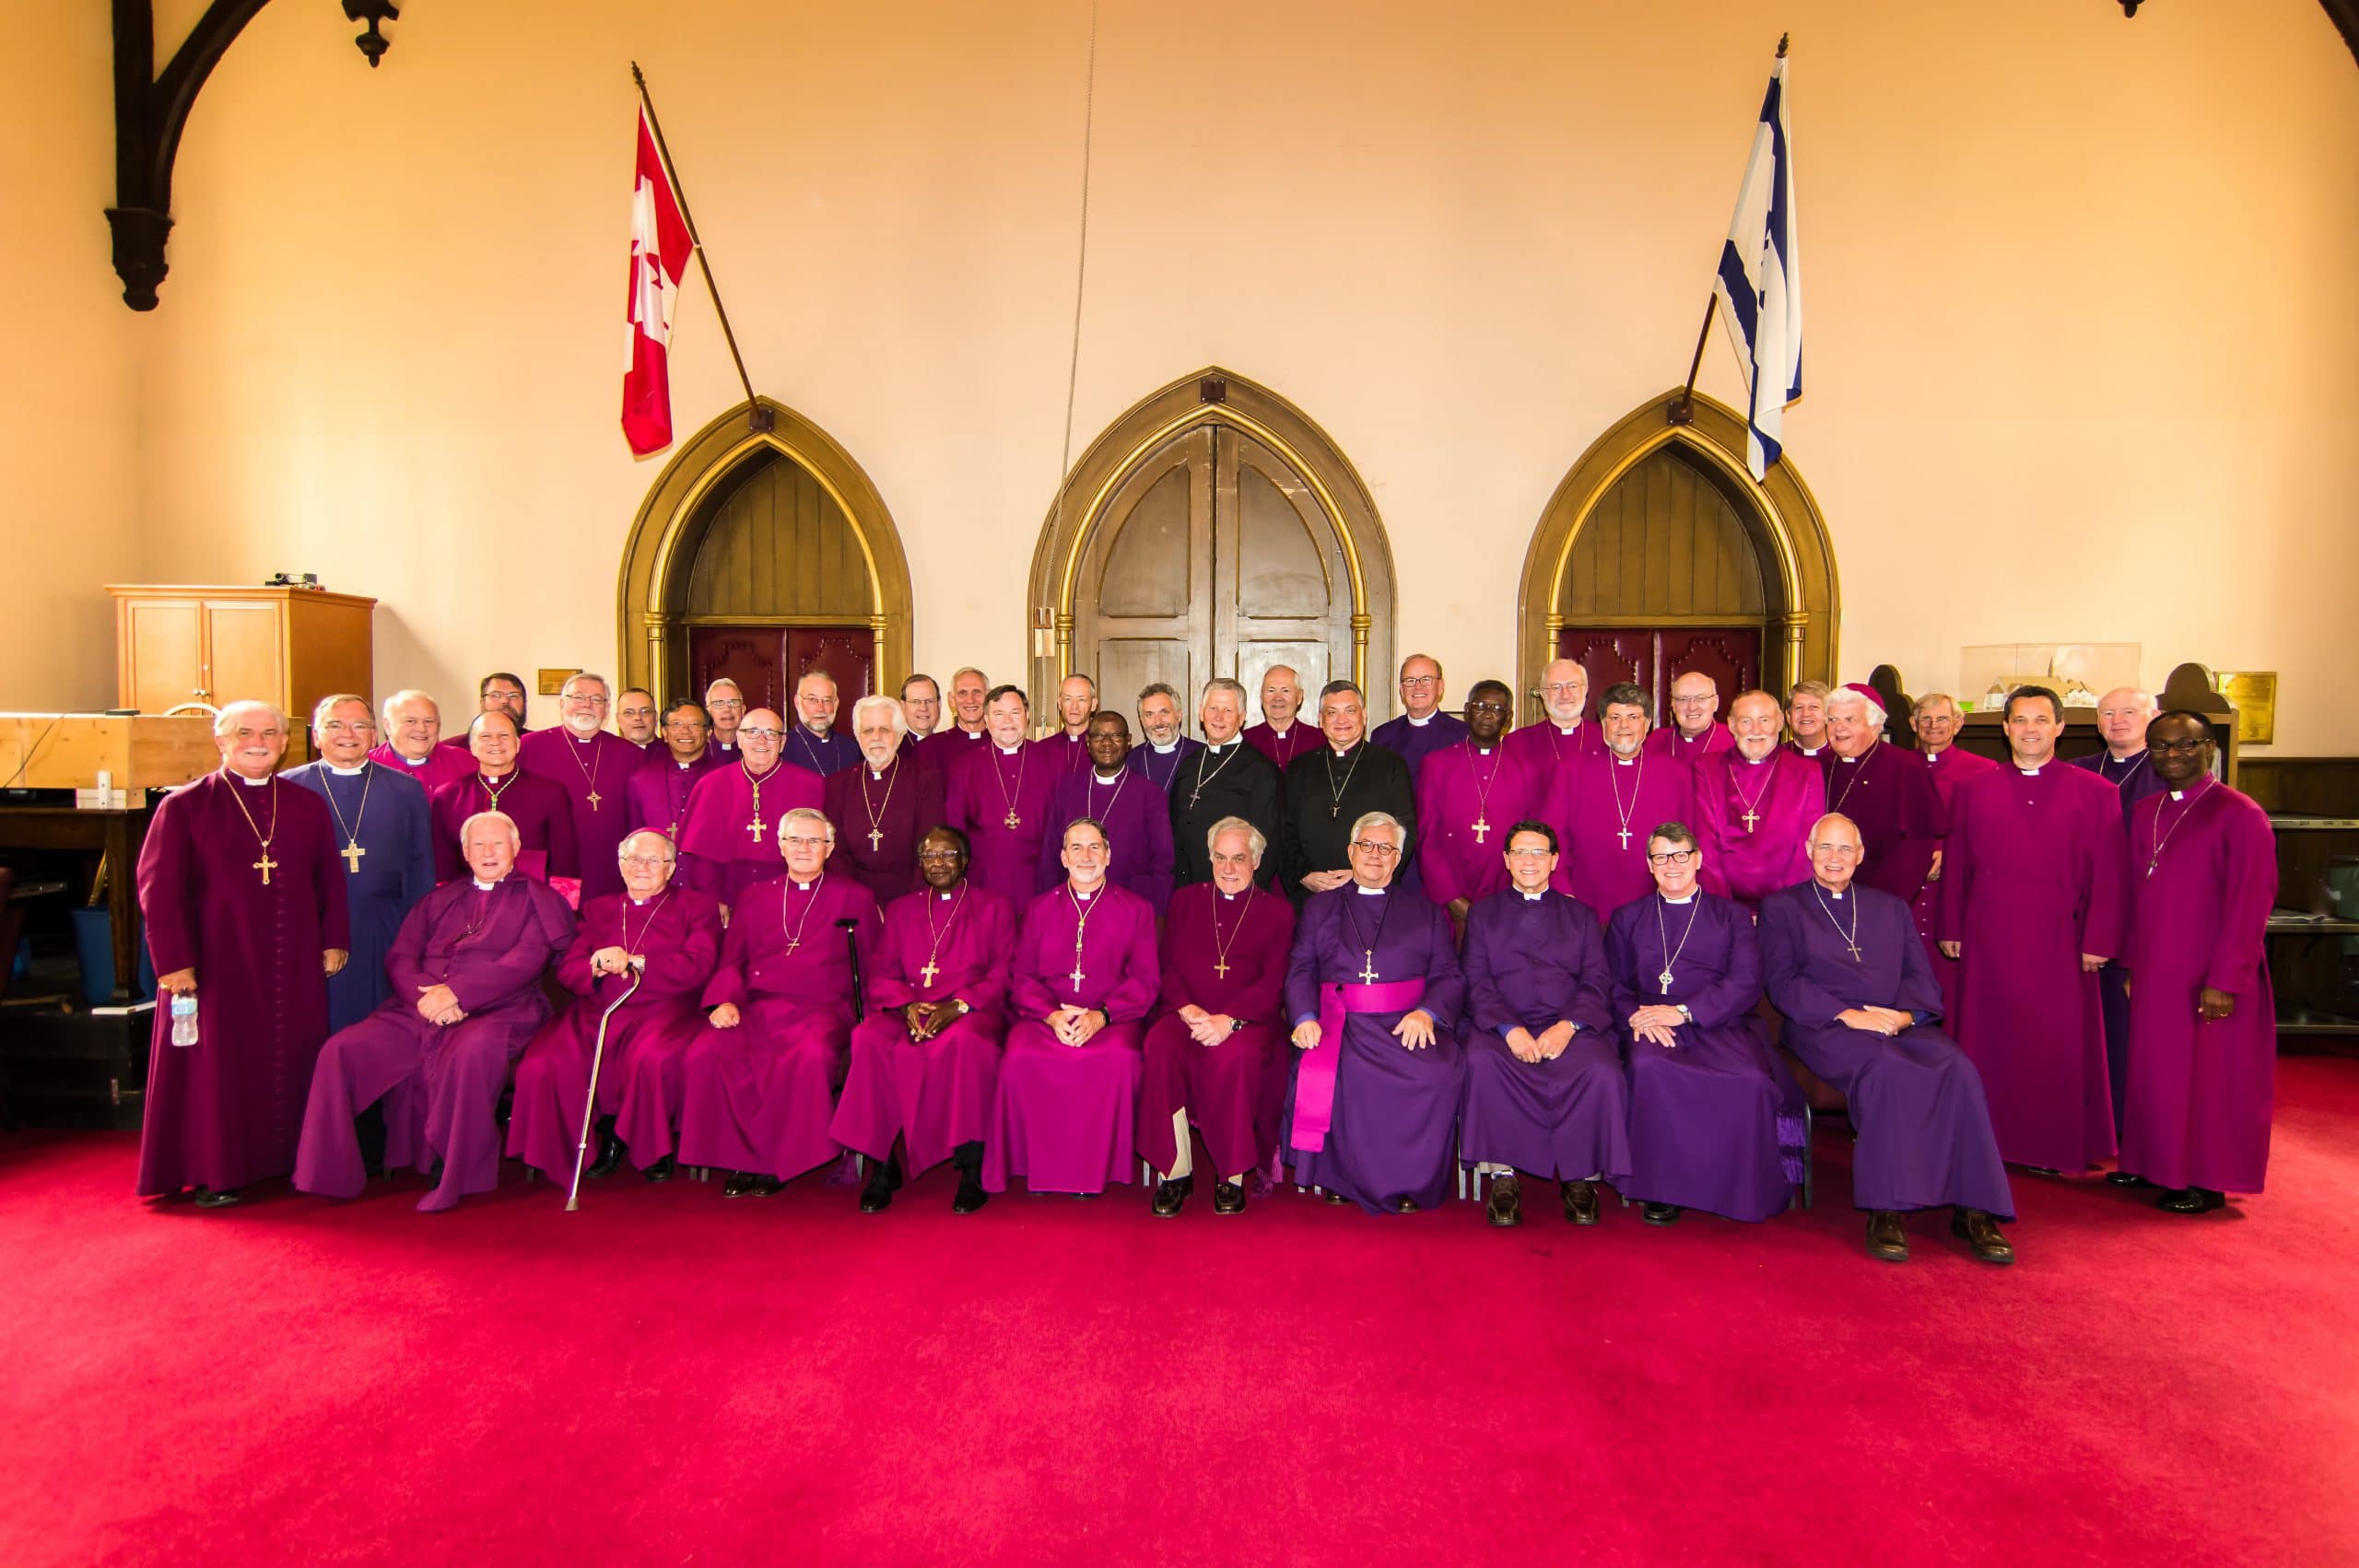 College Of Bishops Statement On The Ordination Of Women The Anglican Church In North America